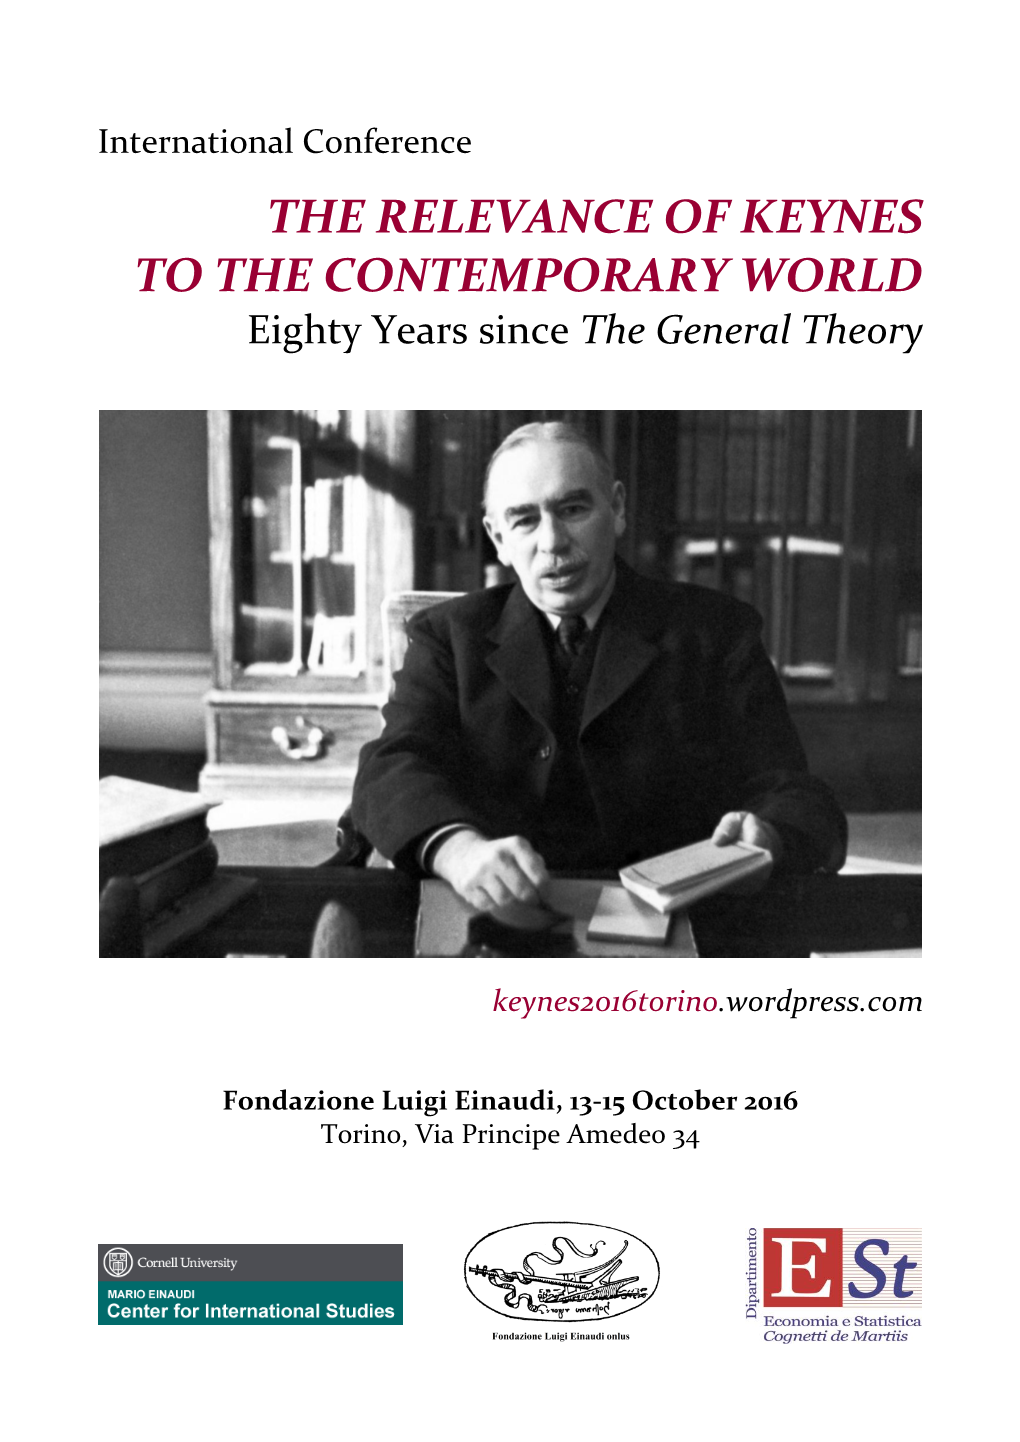 THE RELEVANCE of KEYNES to the CONTEMPORARY WORLD Eighty Years Since the General Theory